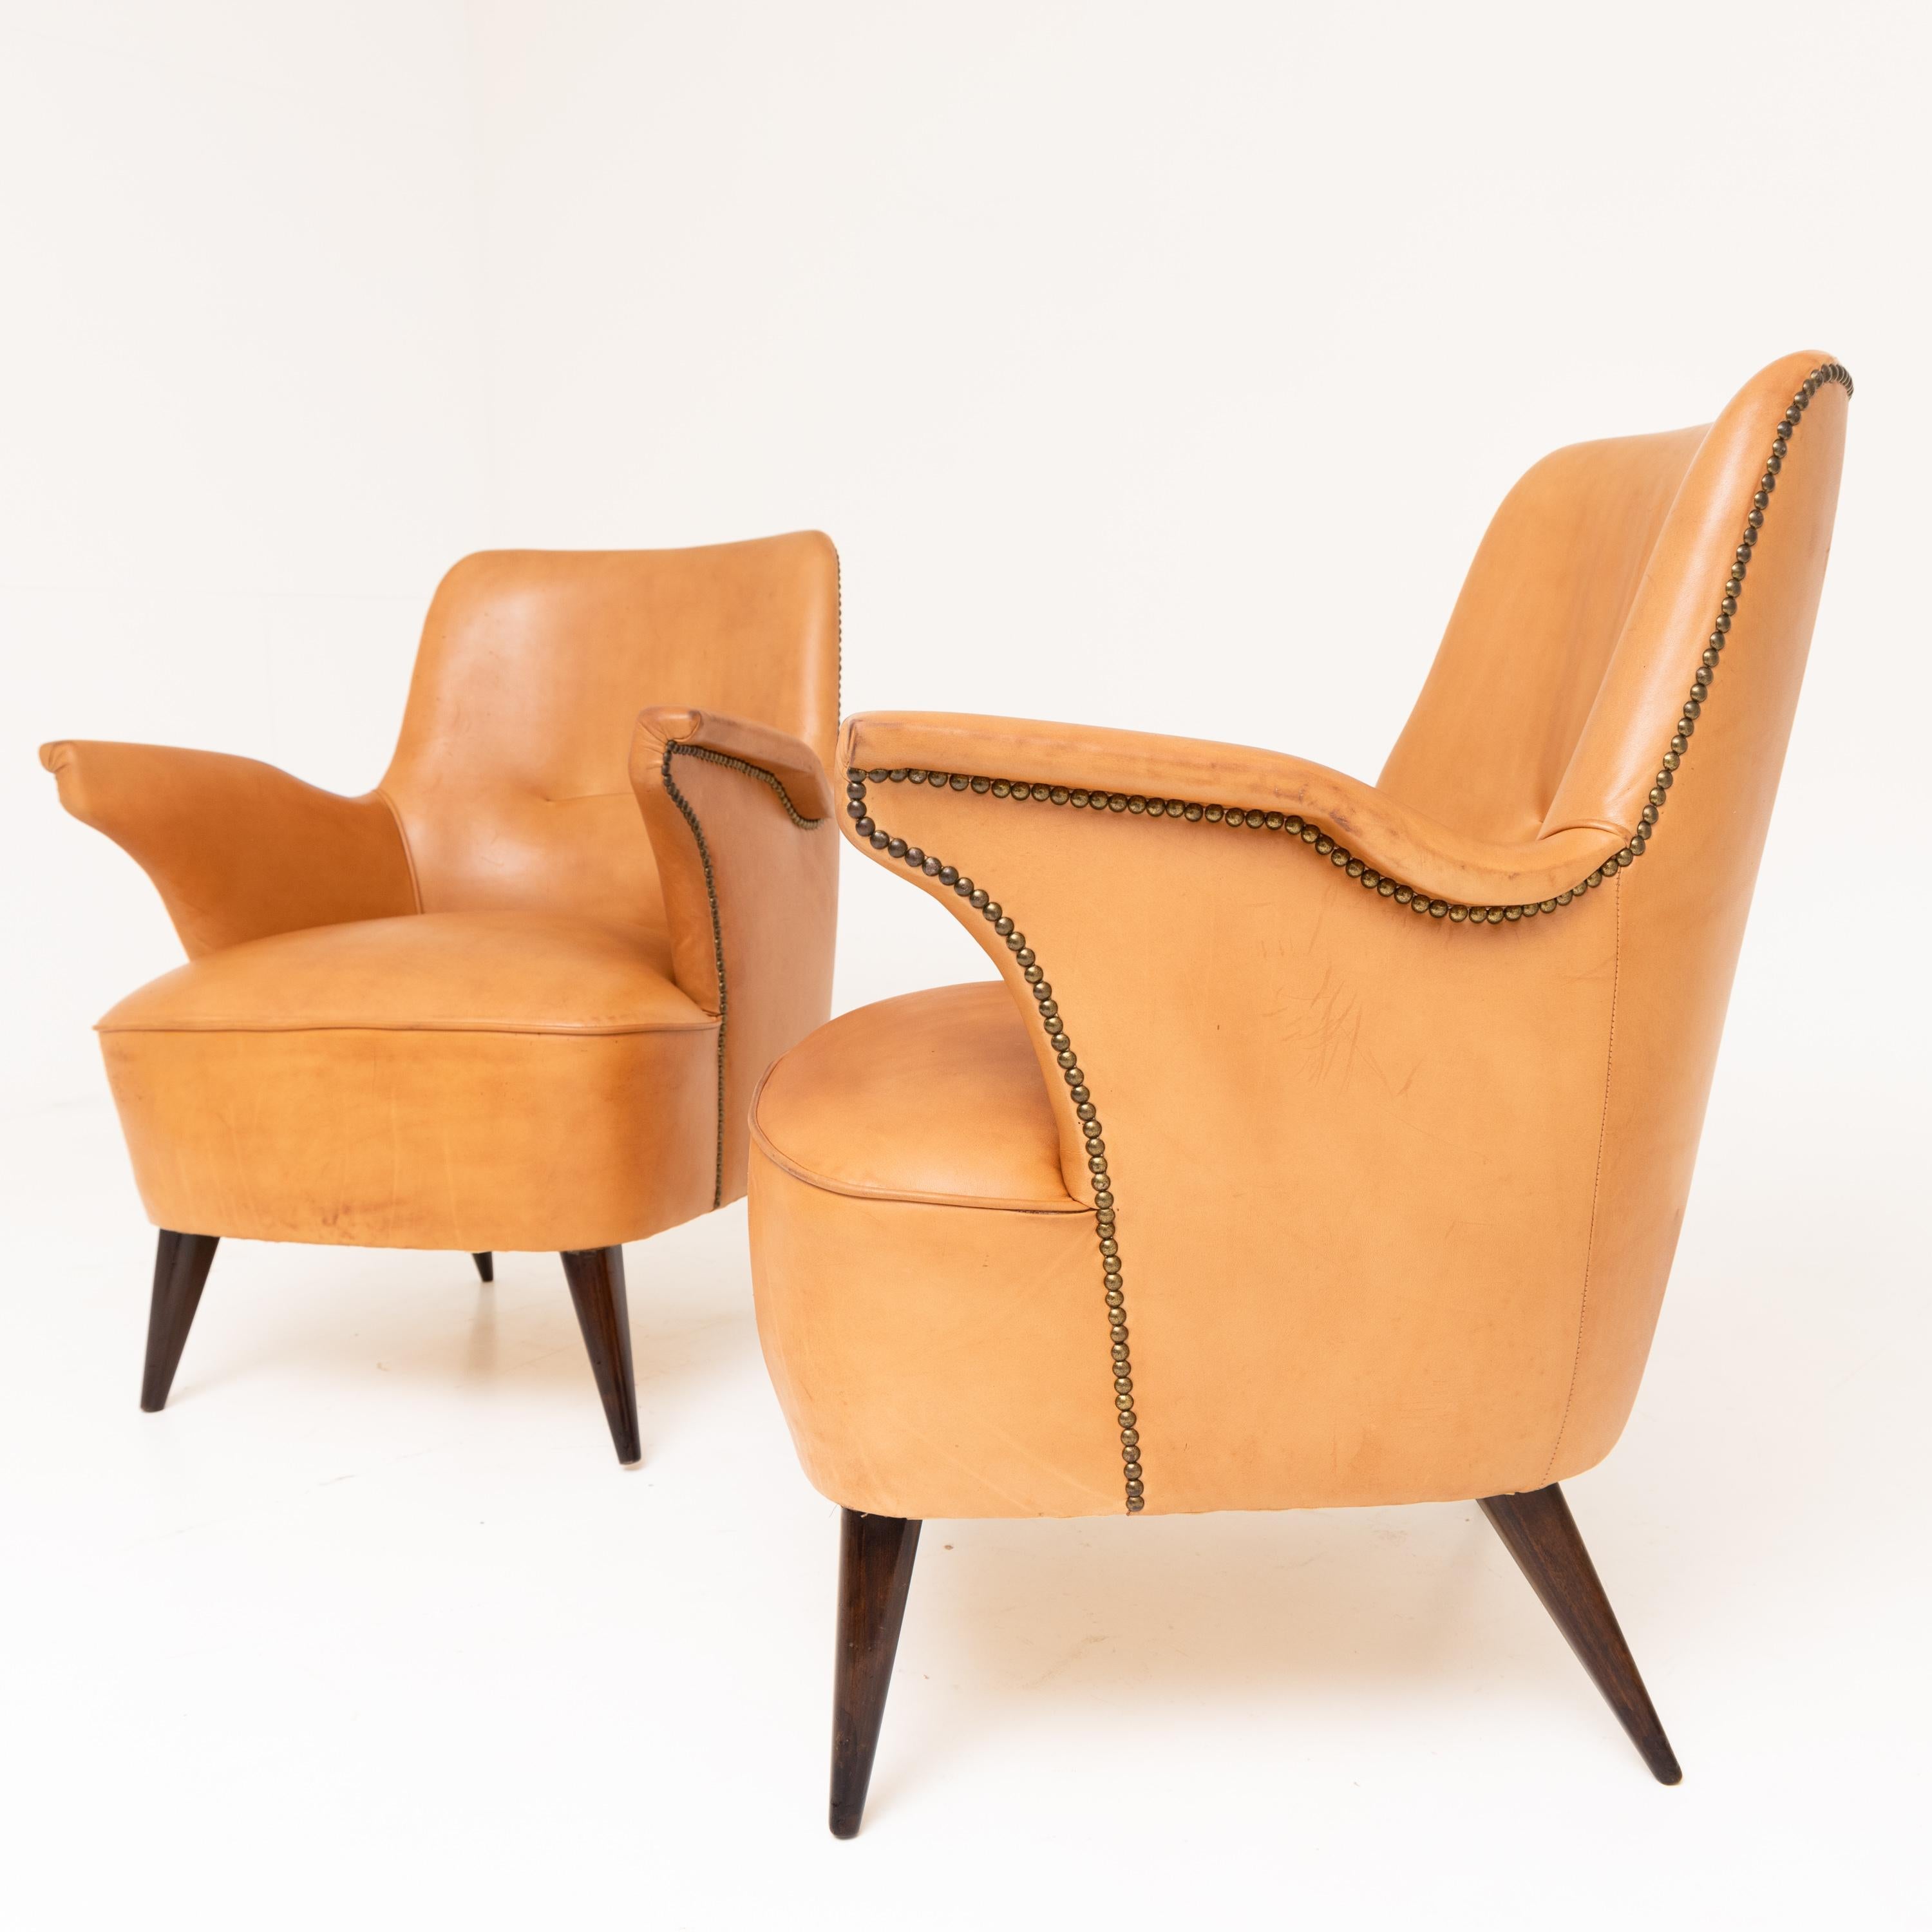 Mid-20th Century Lounge Chairs, Attributed to Giovanni 'Nino' Zoncada, Italy, 1950s